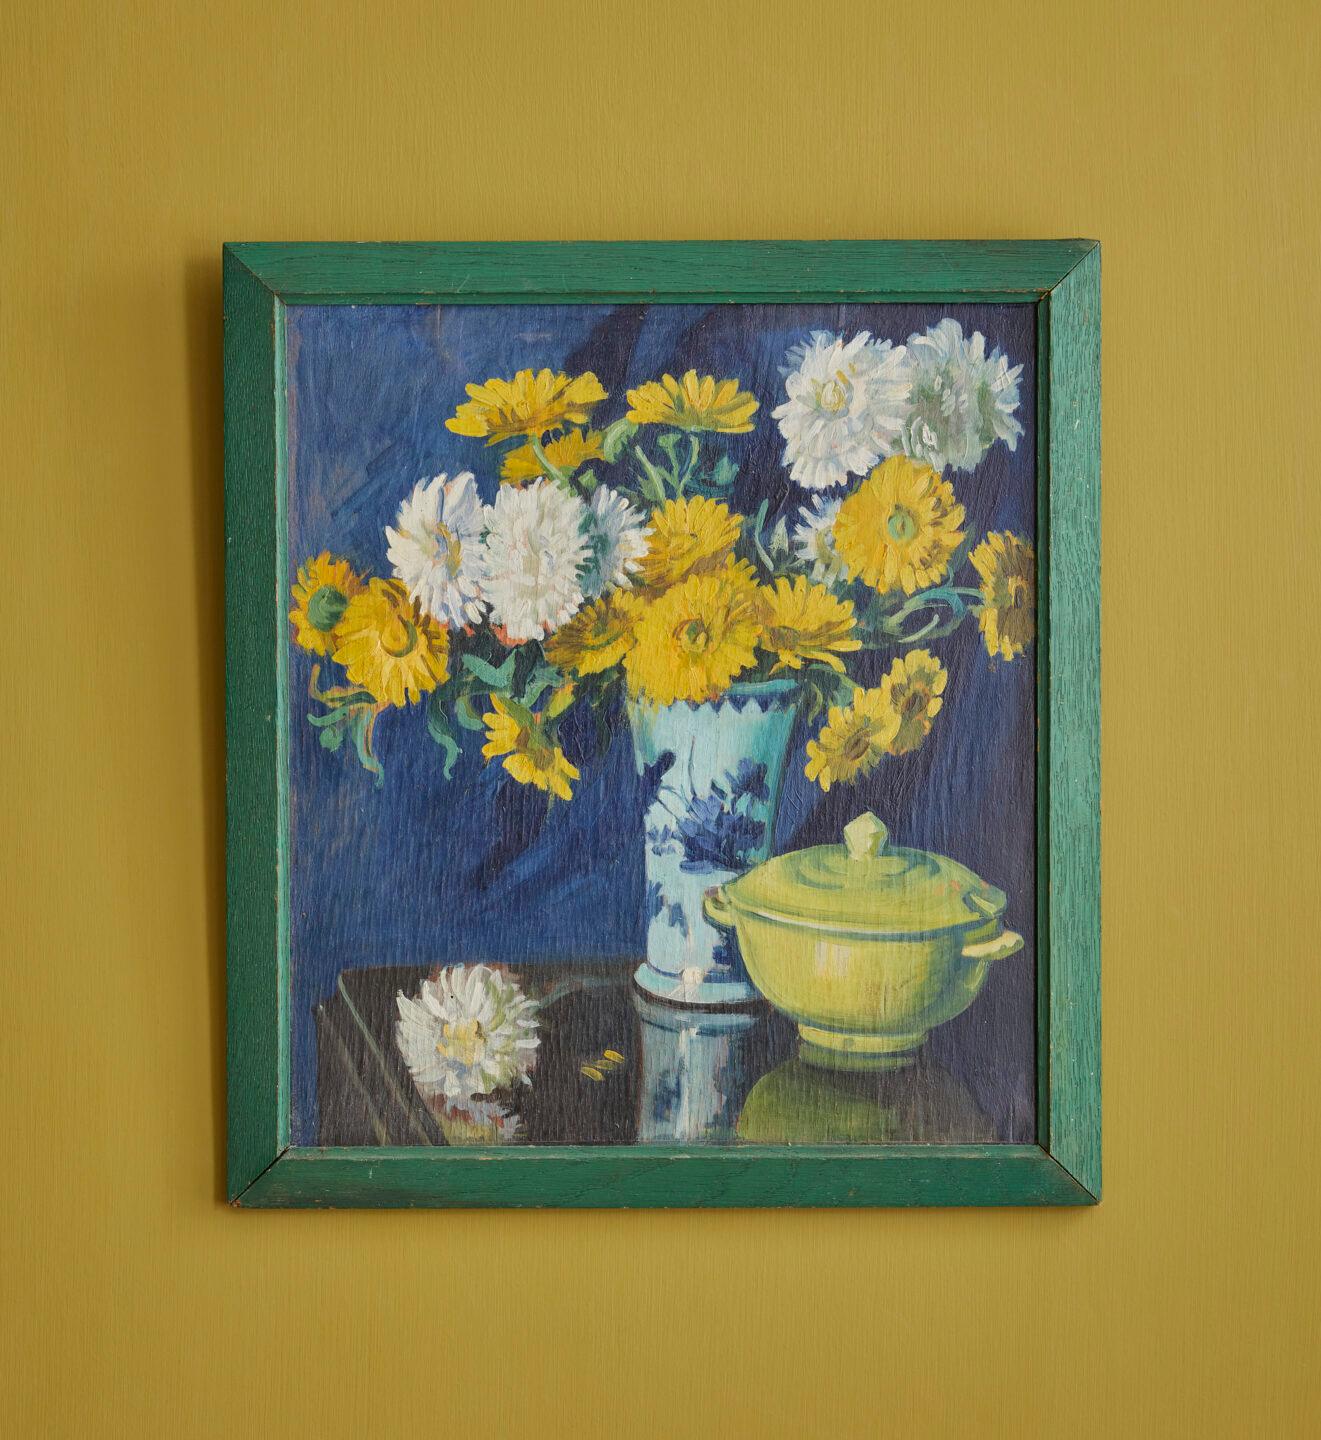 England, Mid-20th Century

Yellow flowers and tureen. Oil on board. Painted frame.

Measures: H 50 x W 45 x D 1.5 cm.